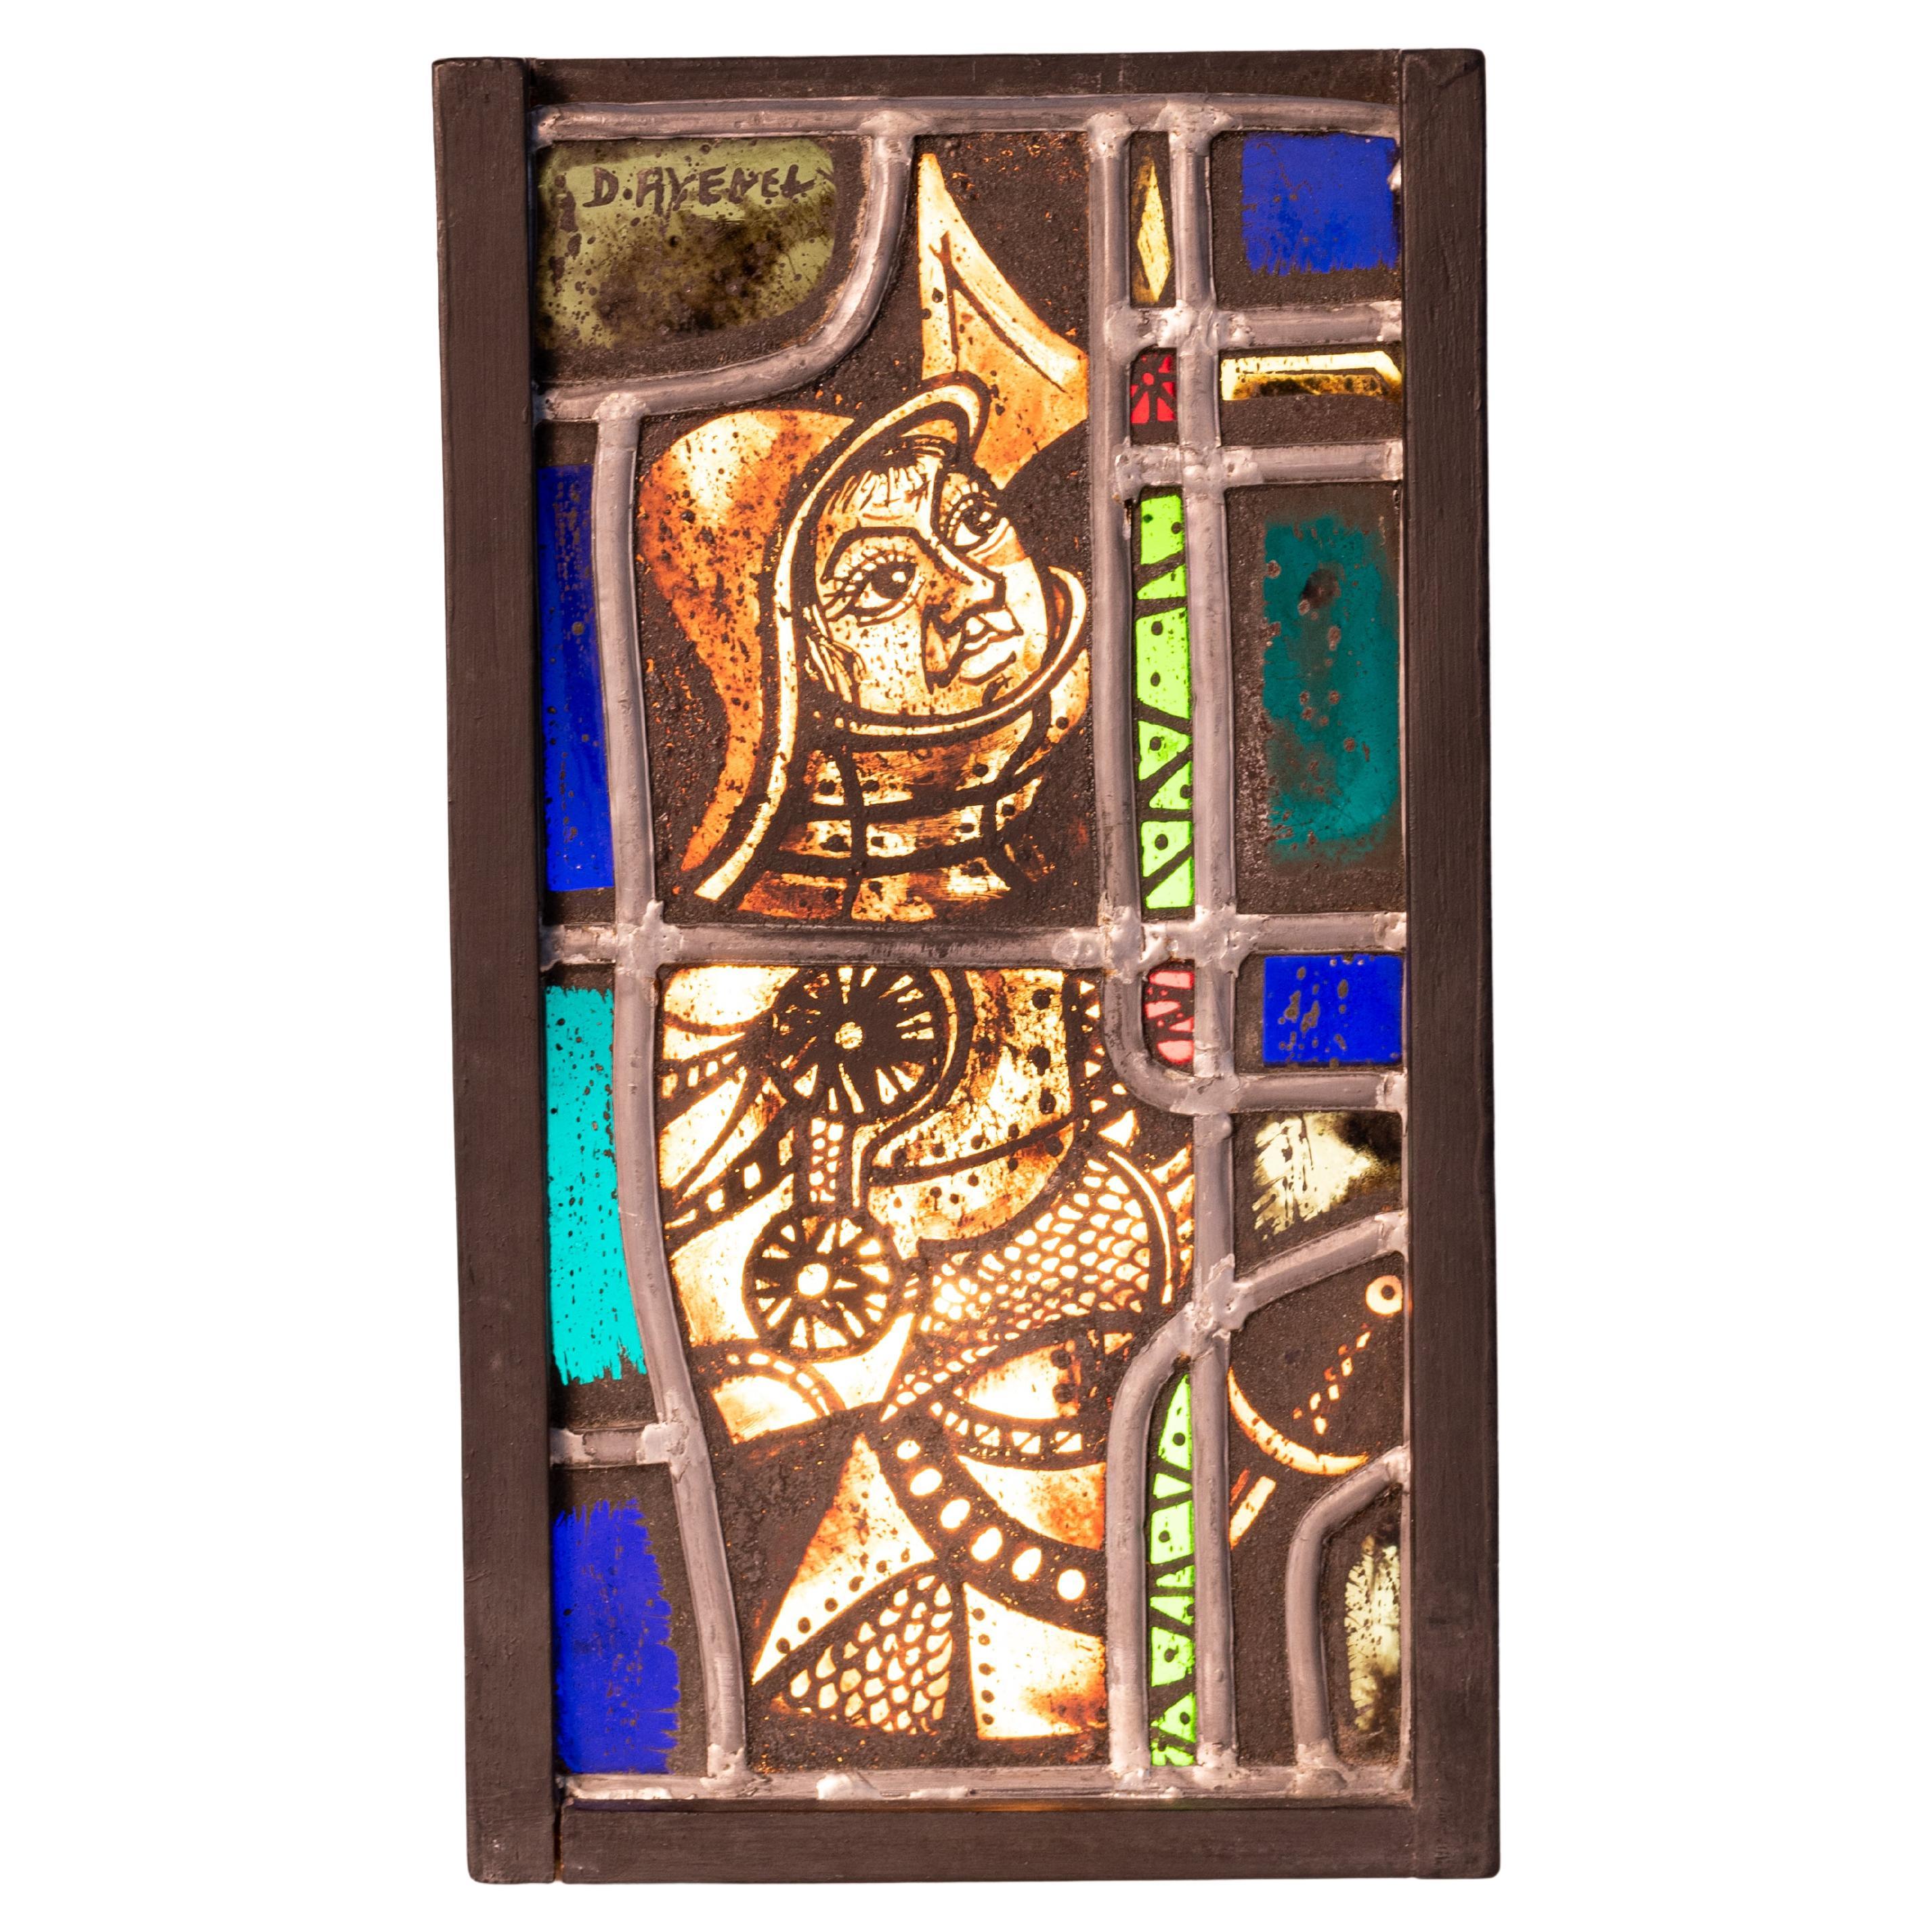 Mid 20th century stained glass display light box